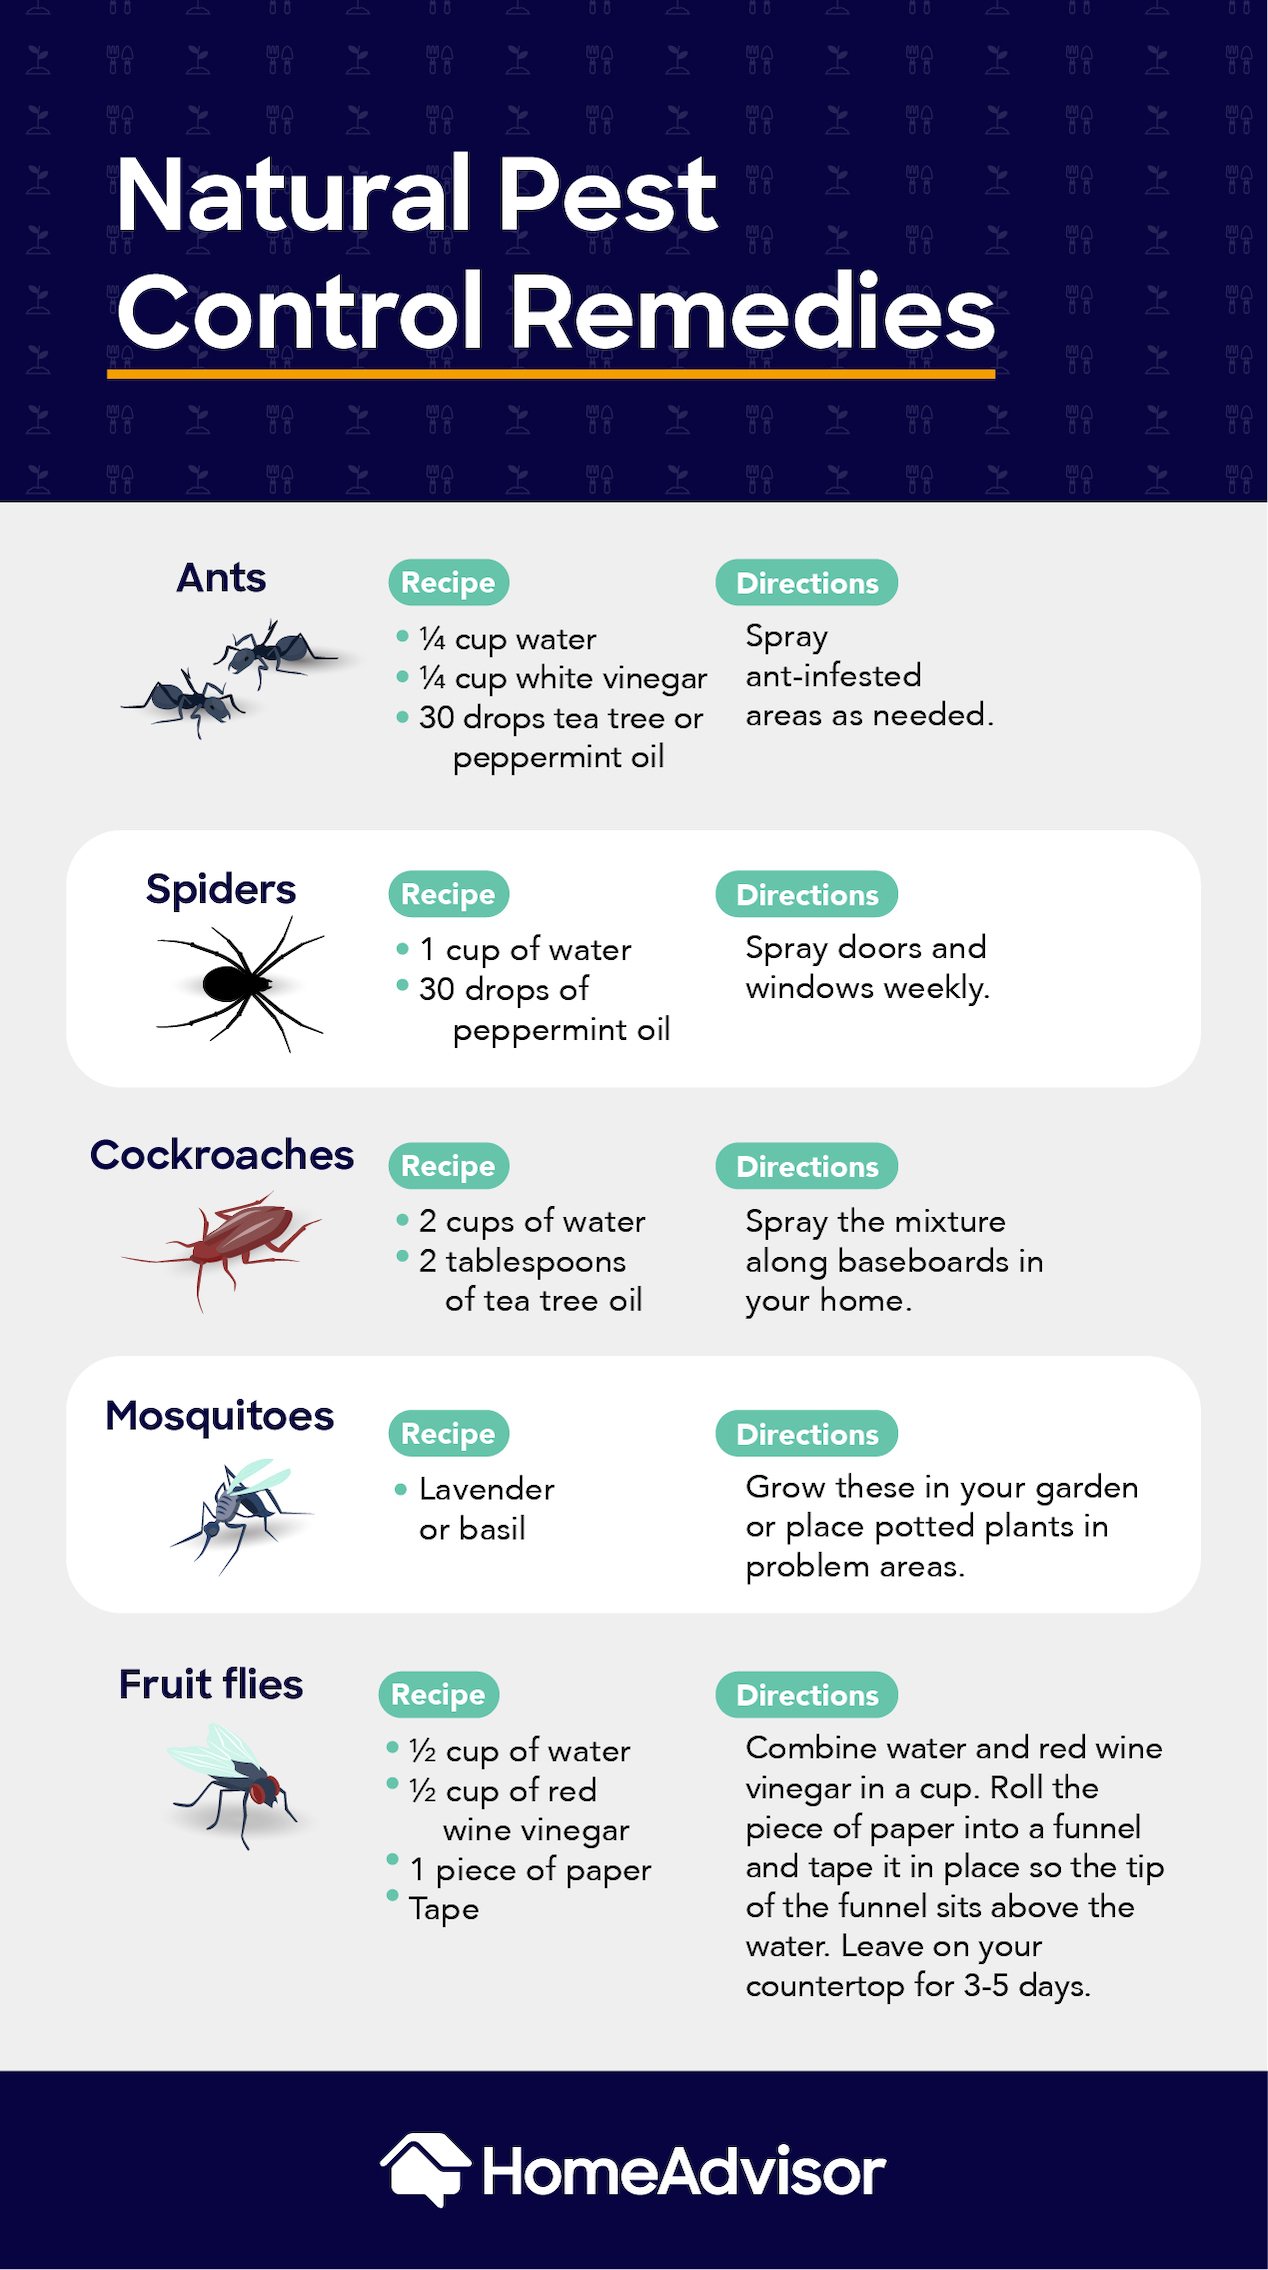 An infographic displaying natural pest control remedies